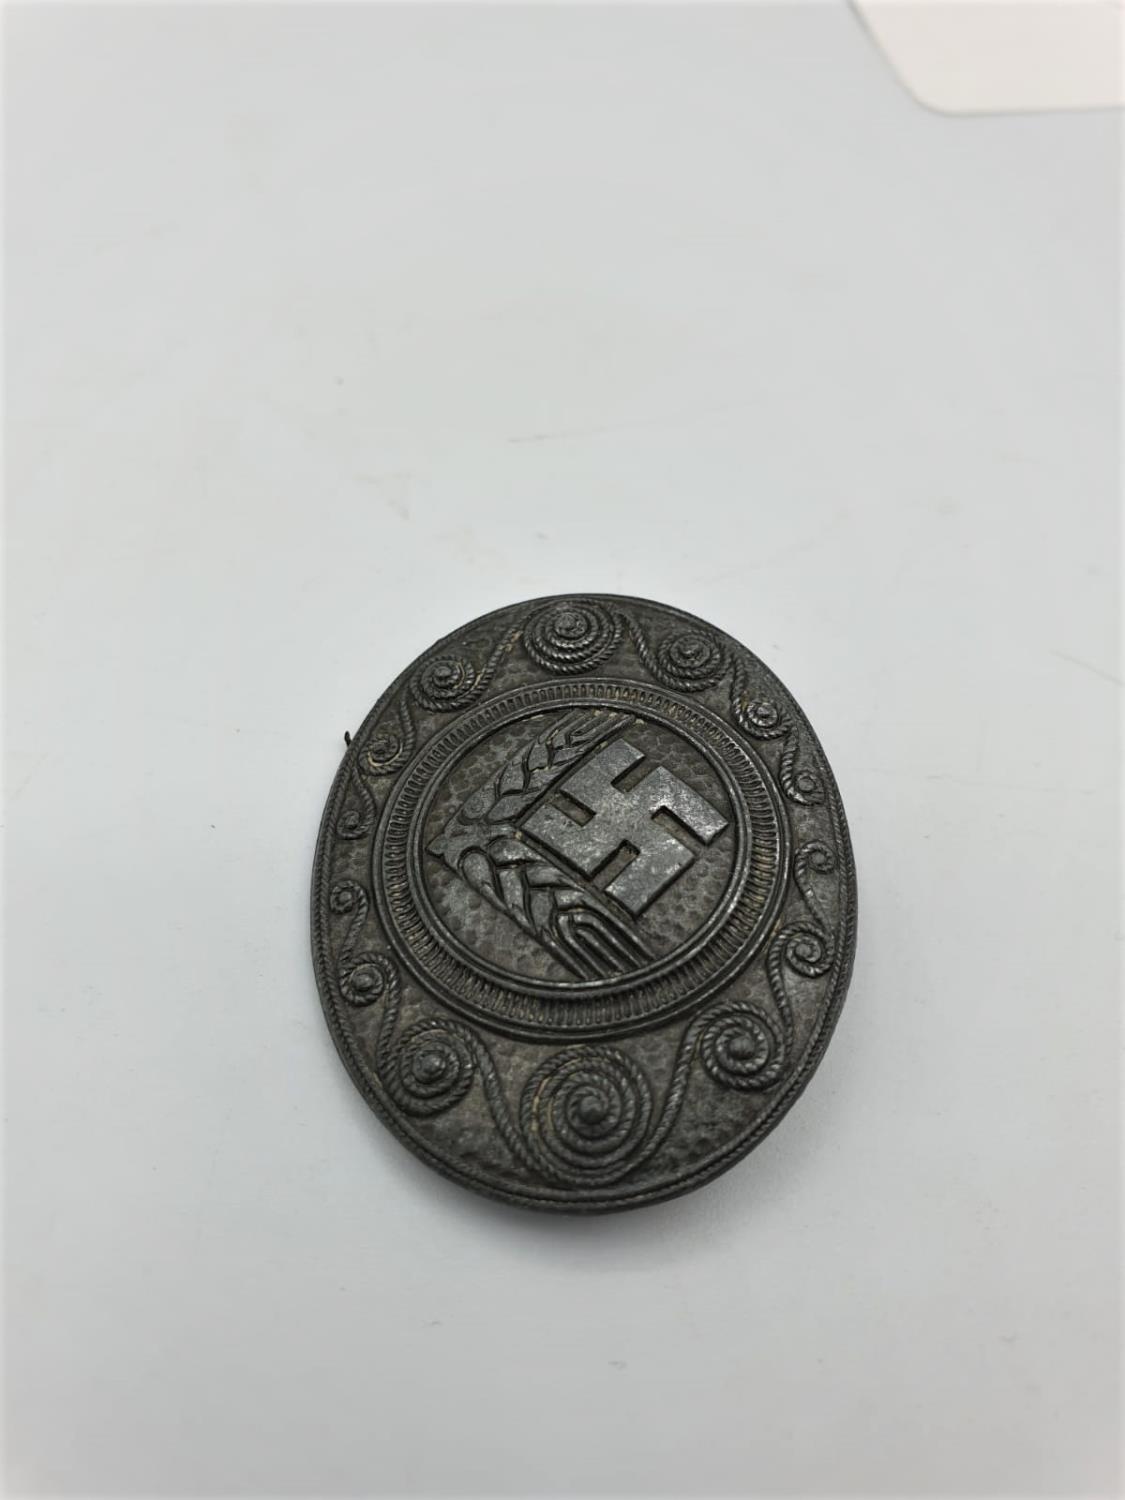 Leadership badge for females age 21-35 national labour service - Image 2 of 8